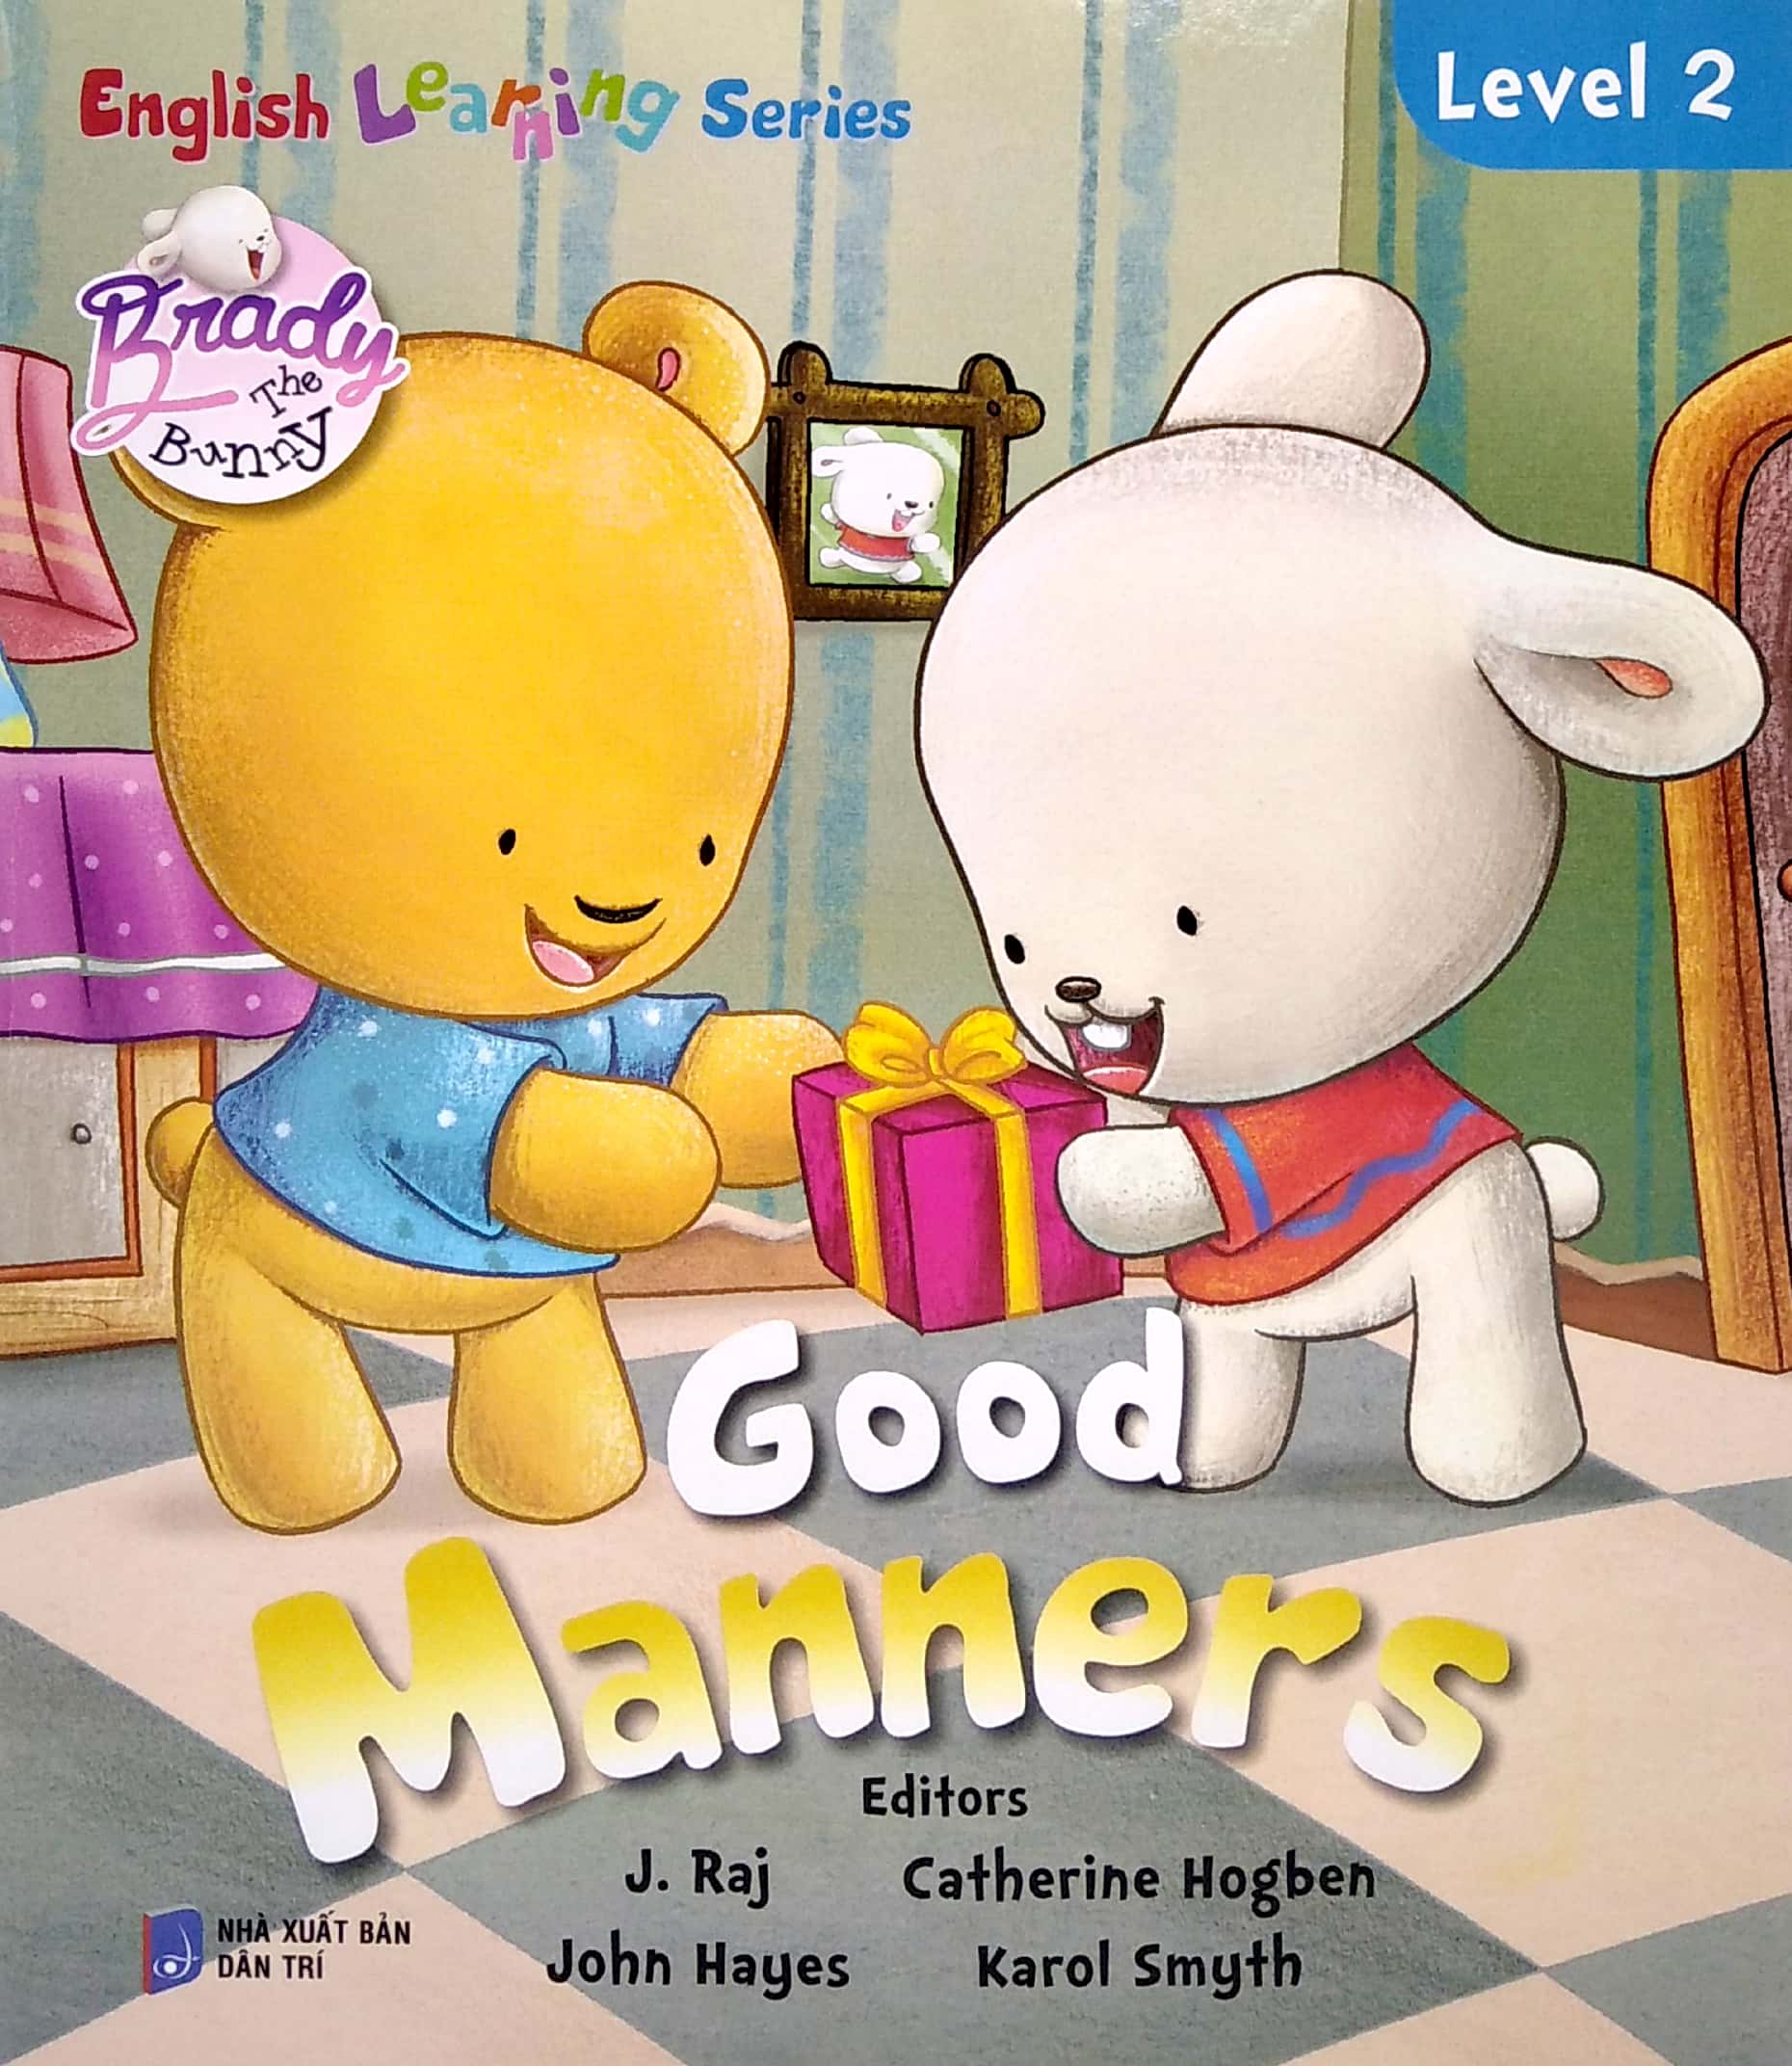 English Learning Series - Level 2: Good Manners PDF